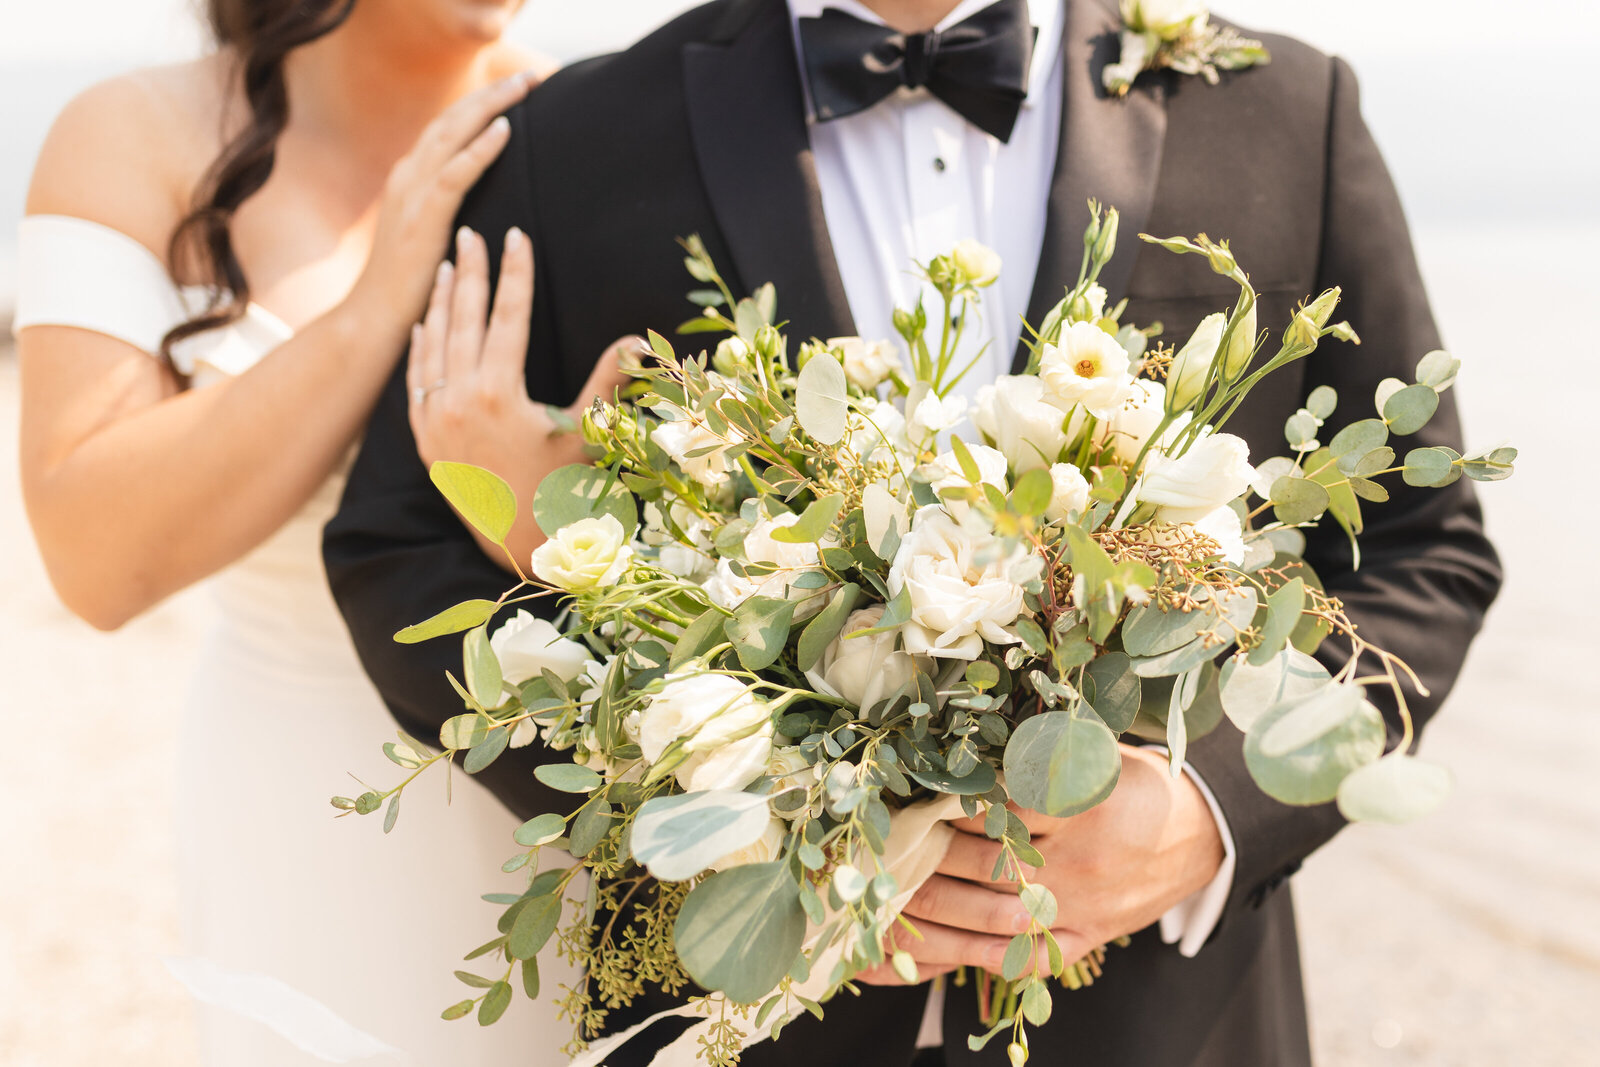 groom holding flower bouquet with bride holding his arm